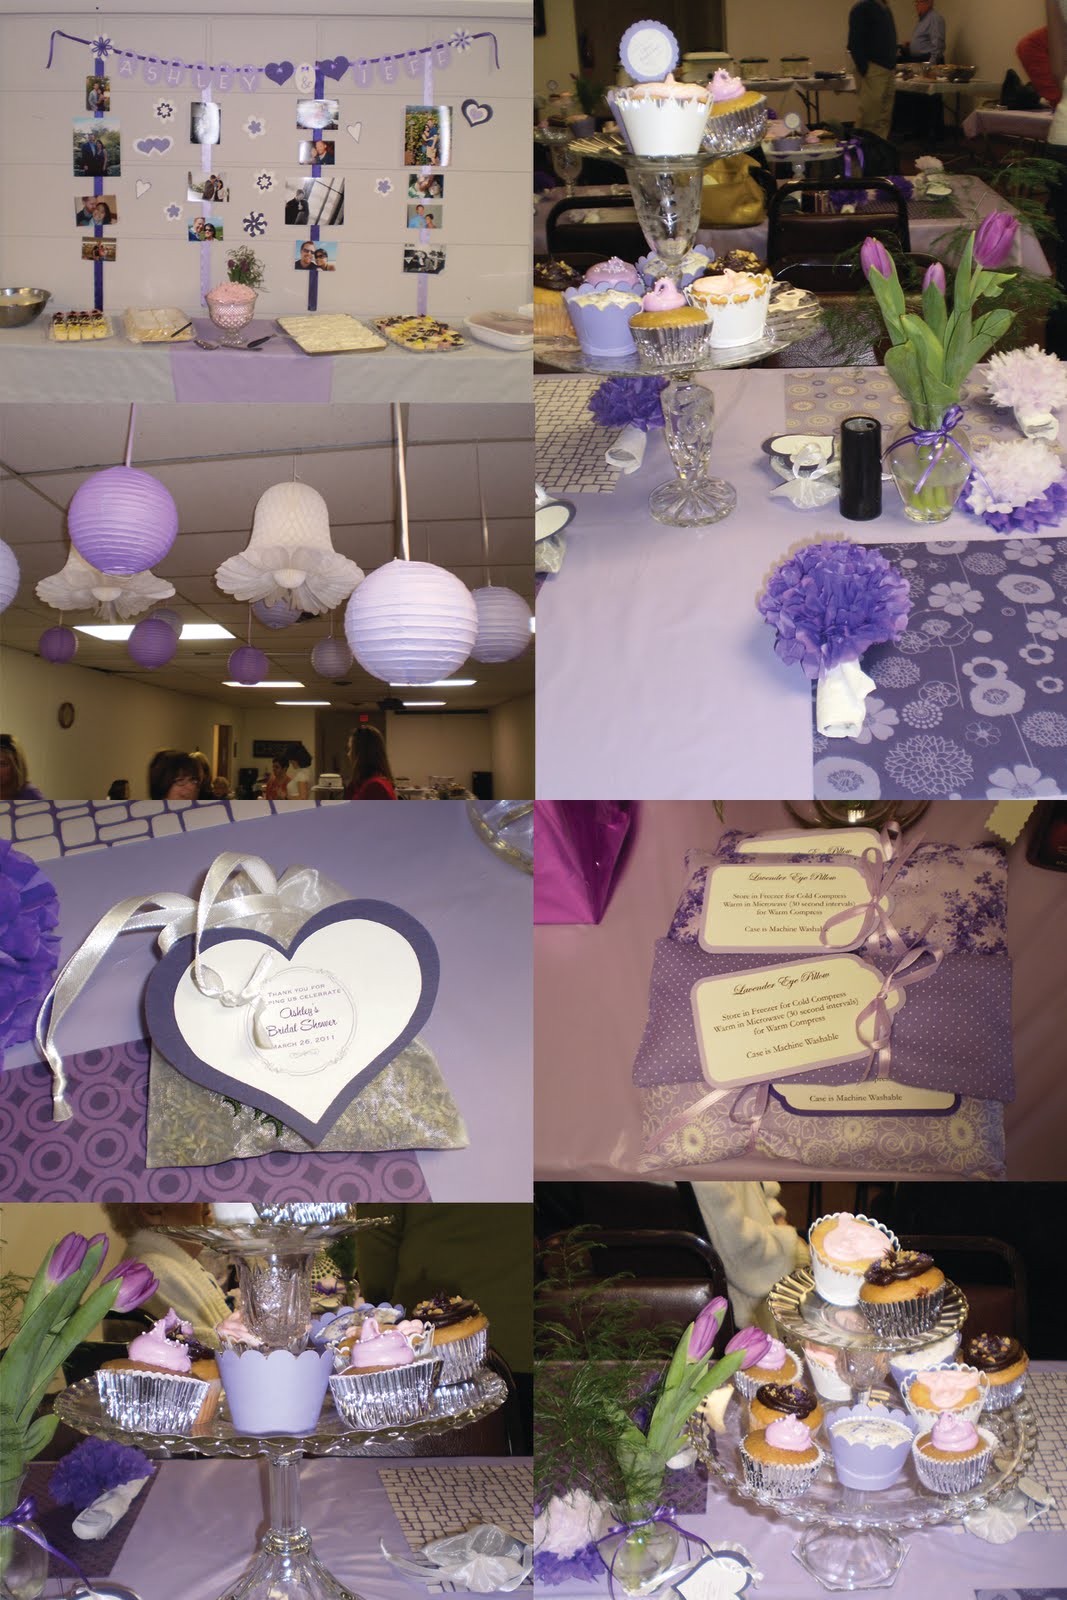 The 2010’s Housewife: A Royal Purple Bridal Shower